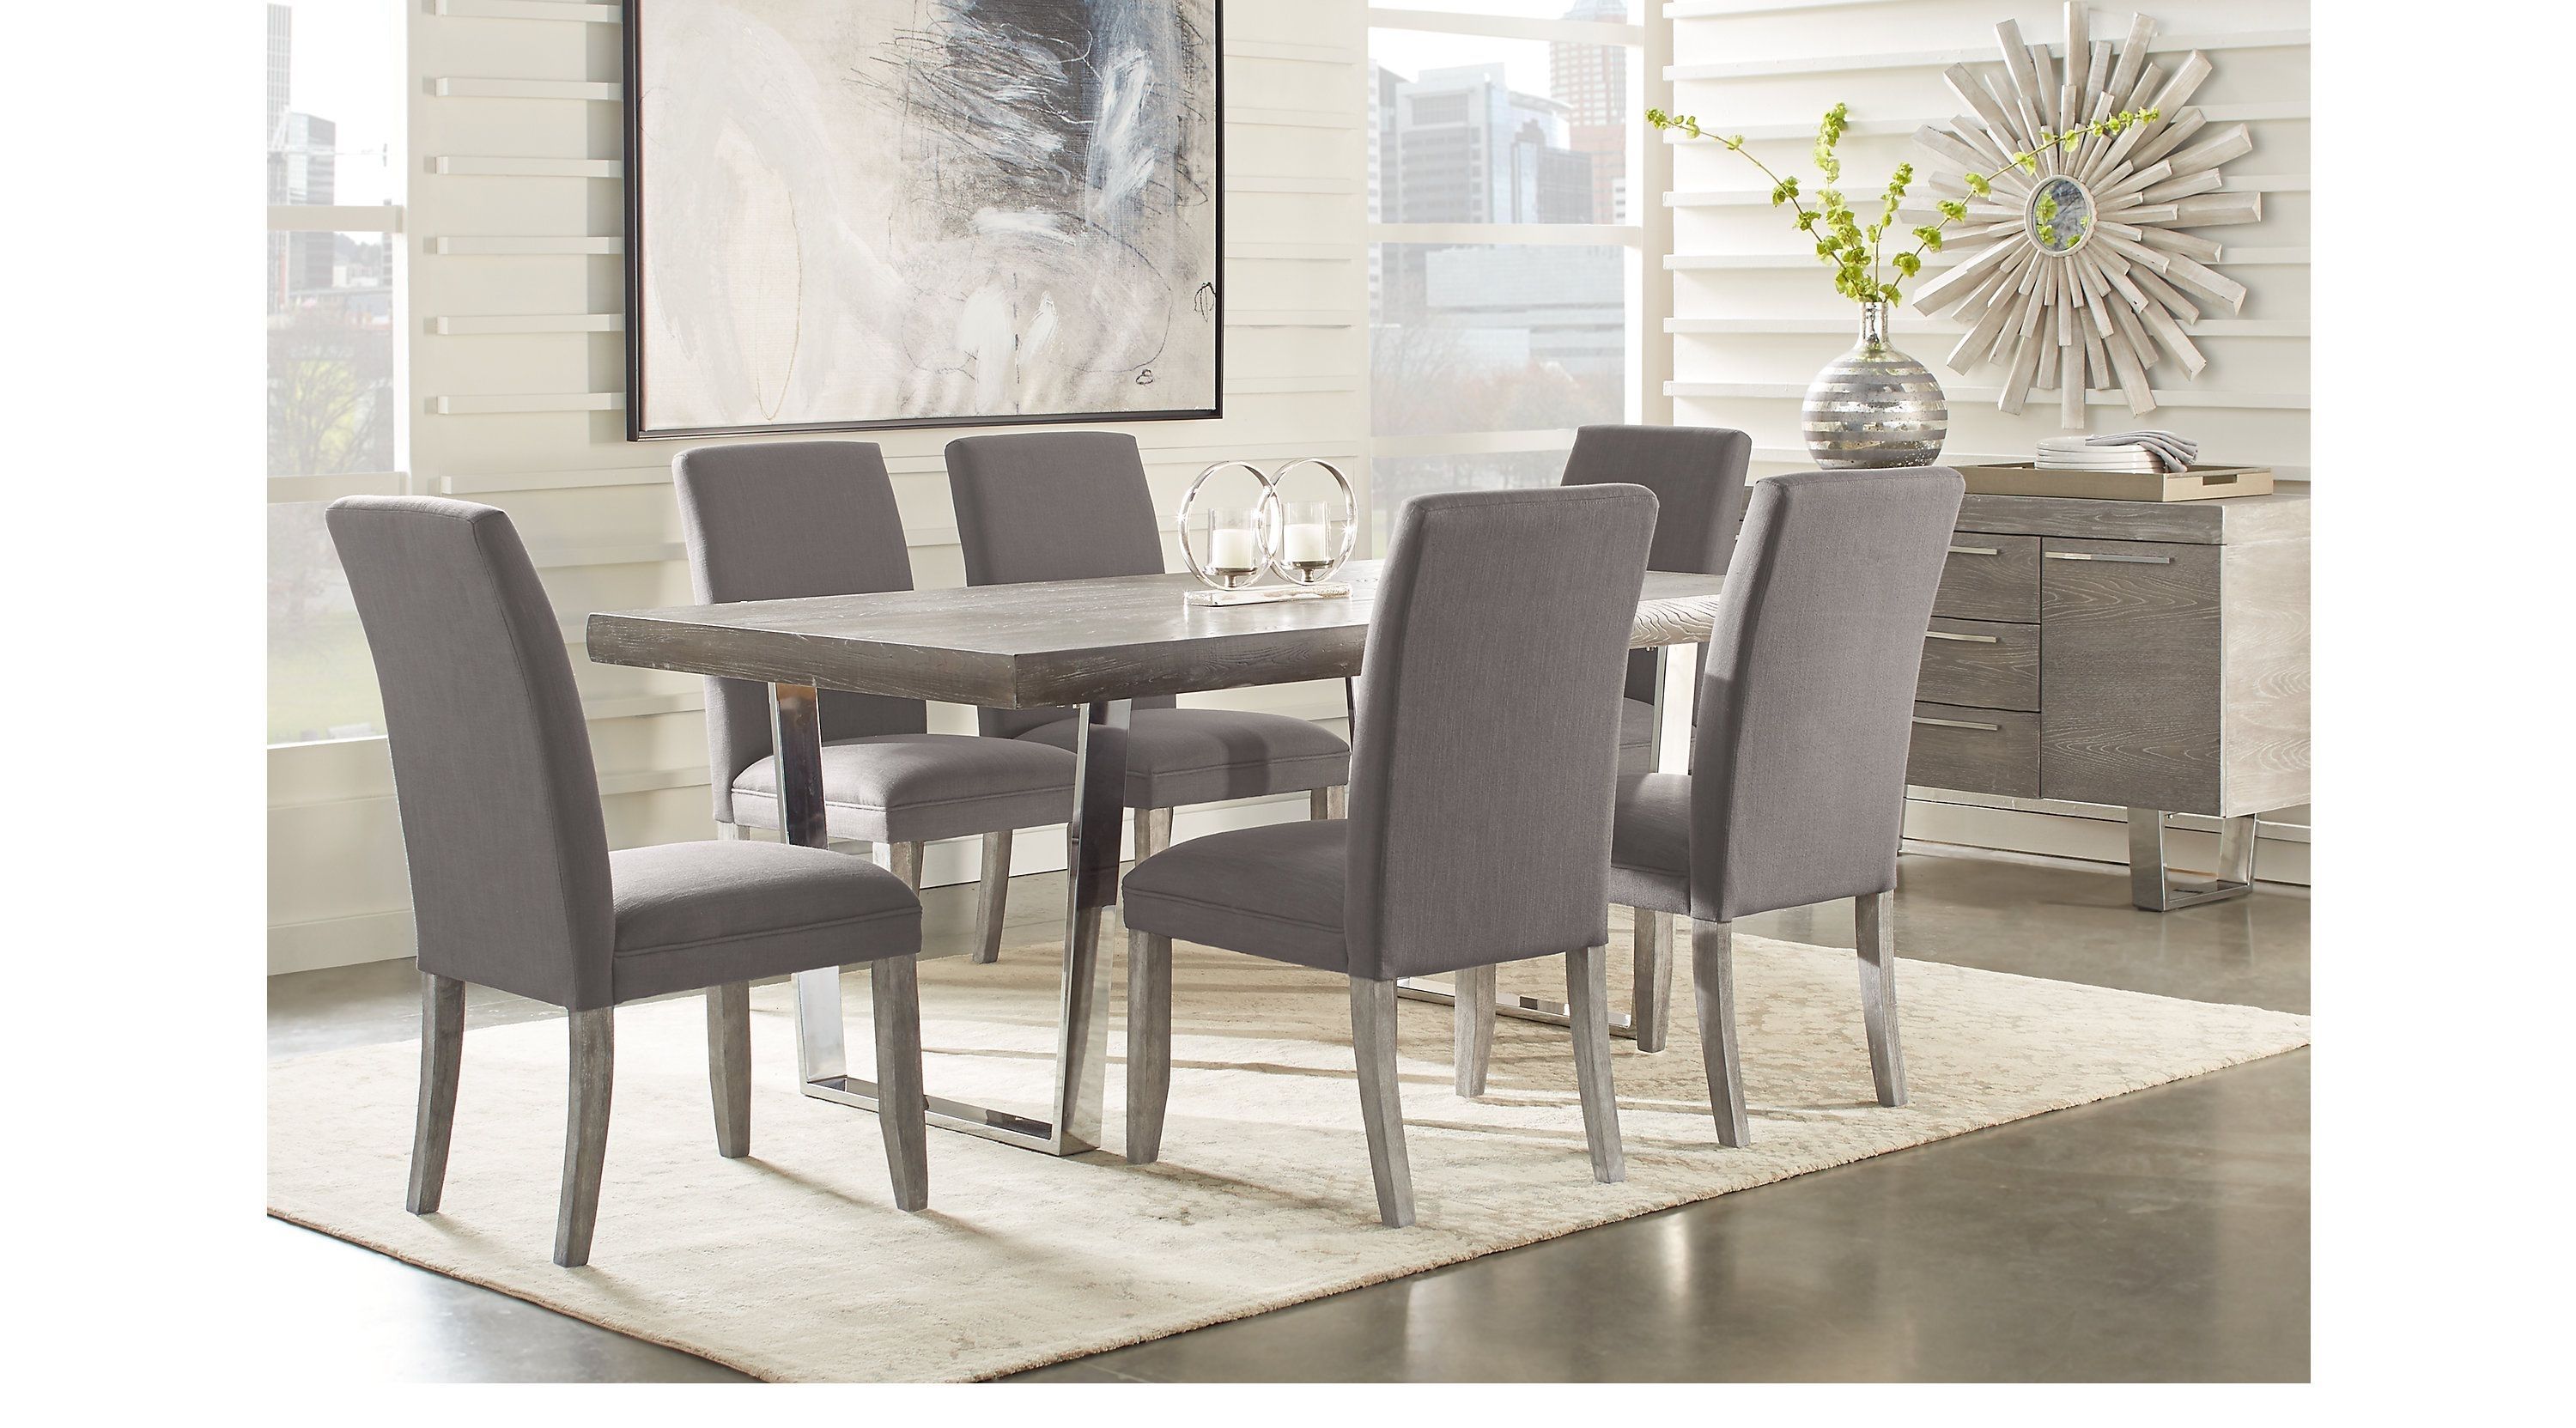 Gray Dining Room Table / ZEYNA 5PC ROUND PLATINUM SILVER FINISH WOOD